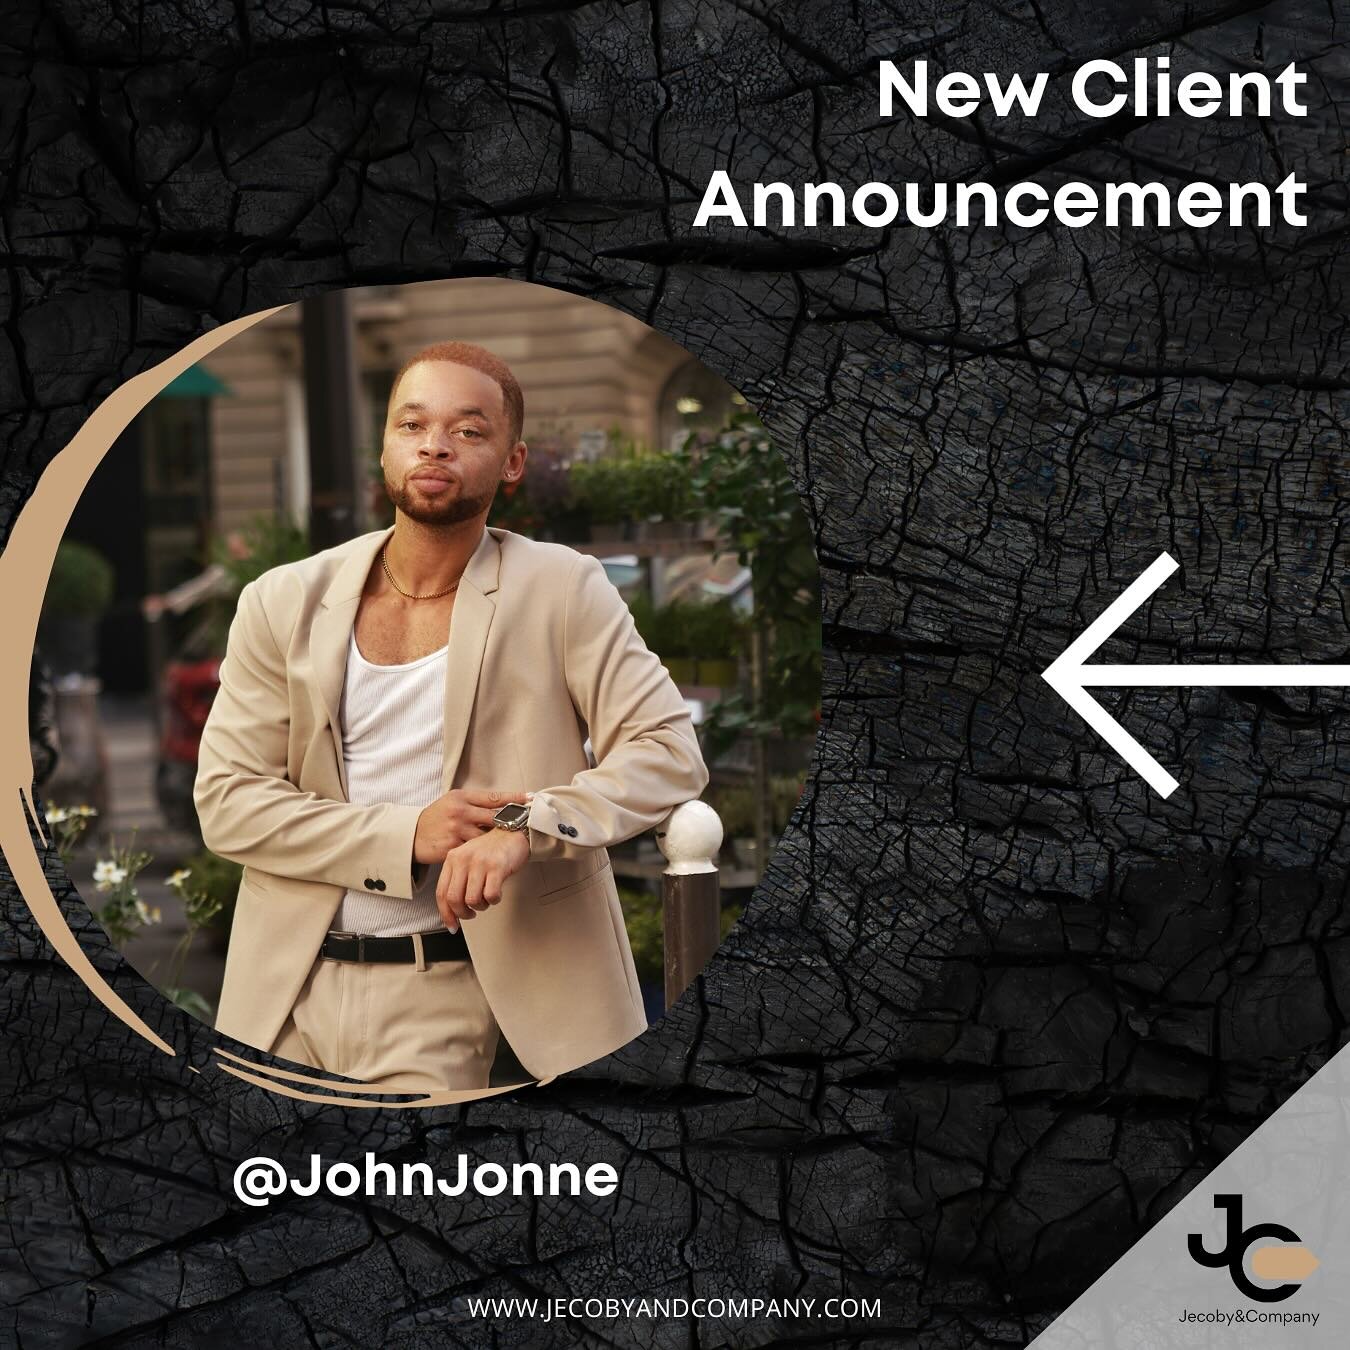 New Client: @johnjonne, the visionary. ✍🏾

Inks dry! I&rsquo;m so excited to work with John-Jonne on his creative and professional journey. J&amp;C will be providing management, and PR services for this partnership.

If you&rsquo;d like to partner w